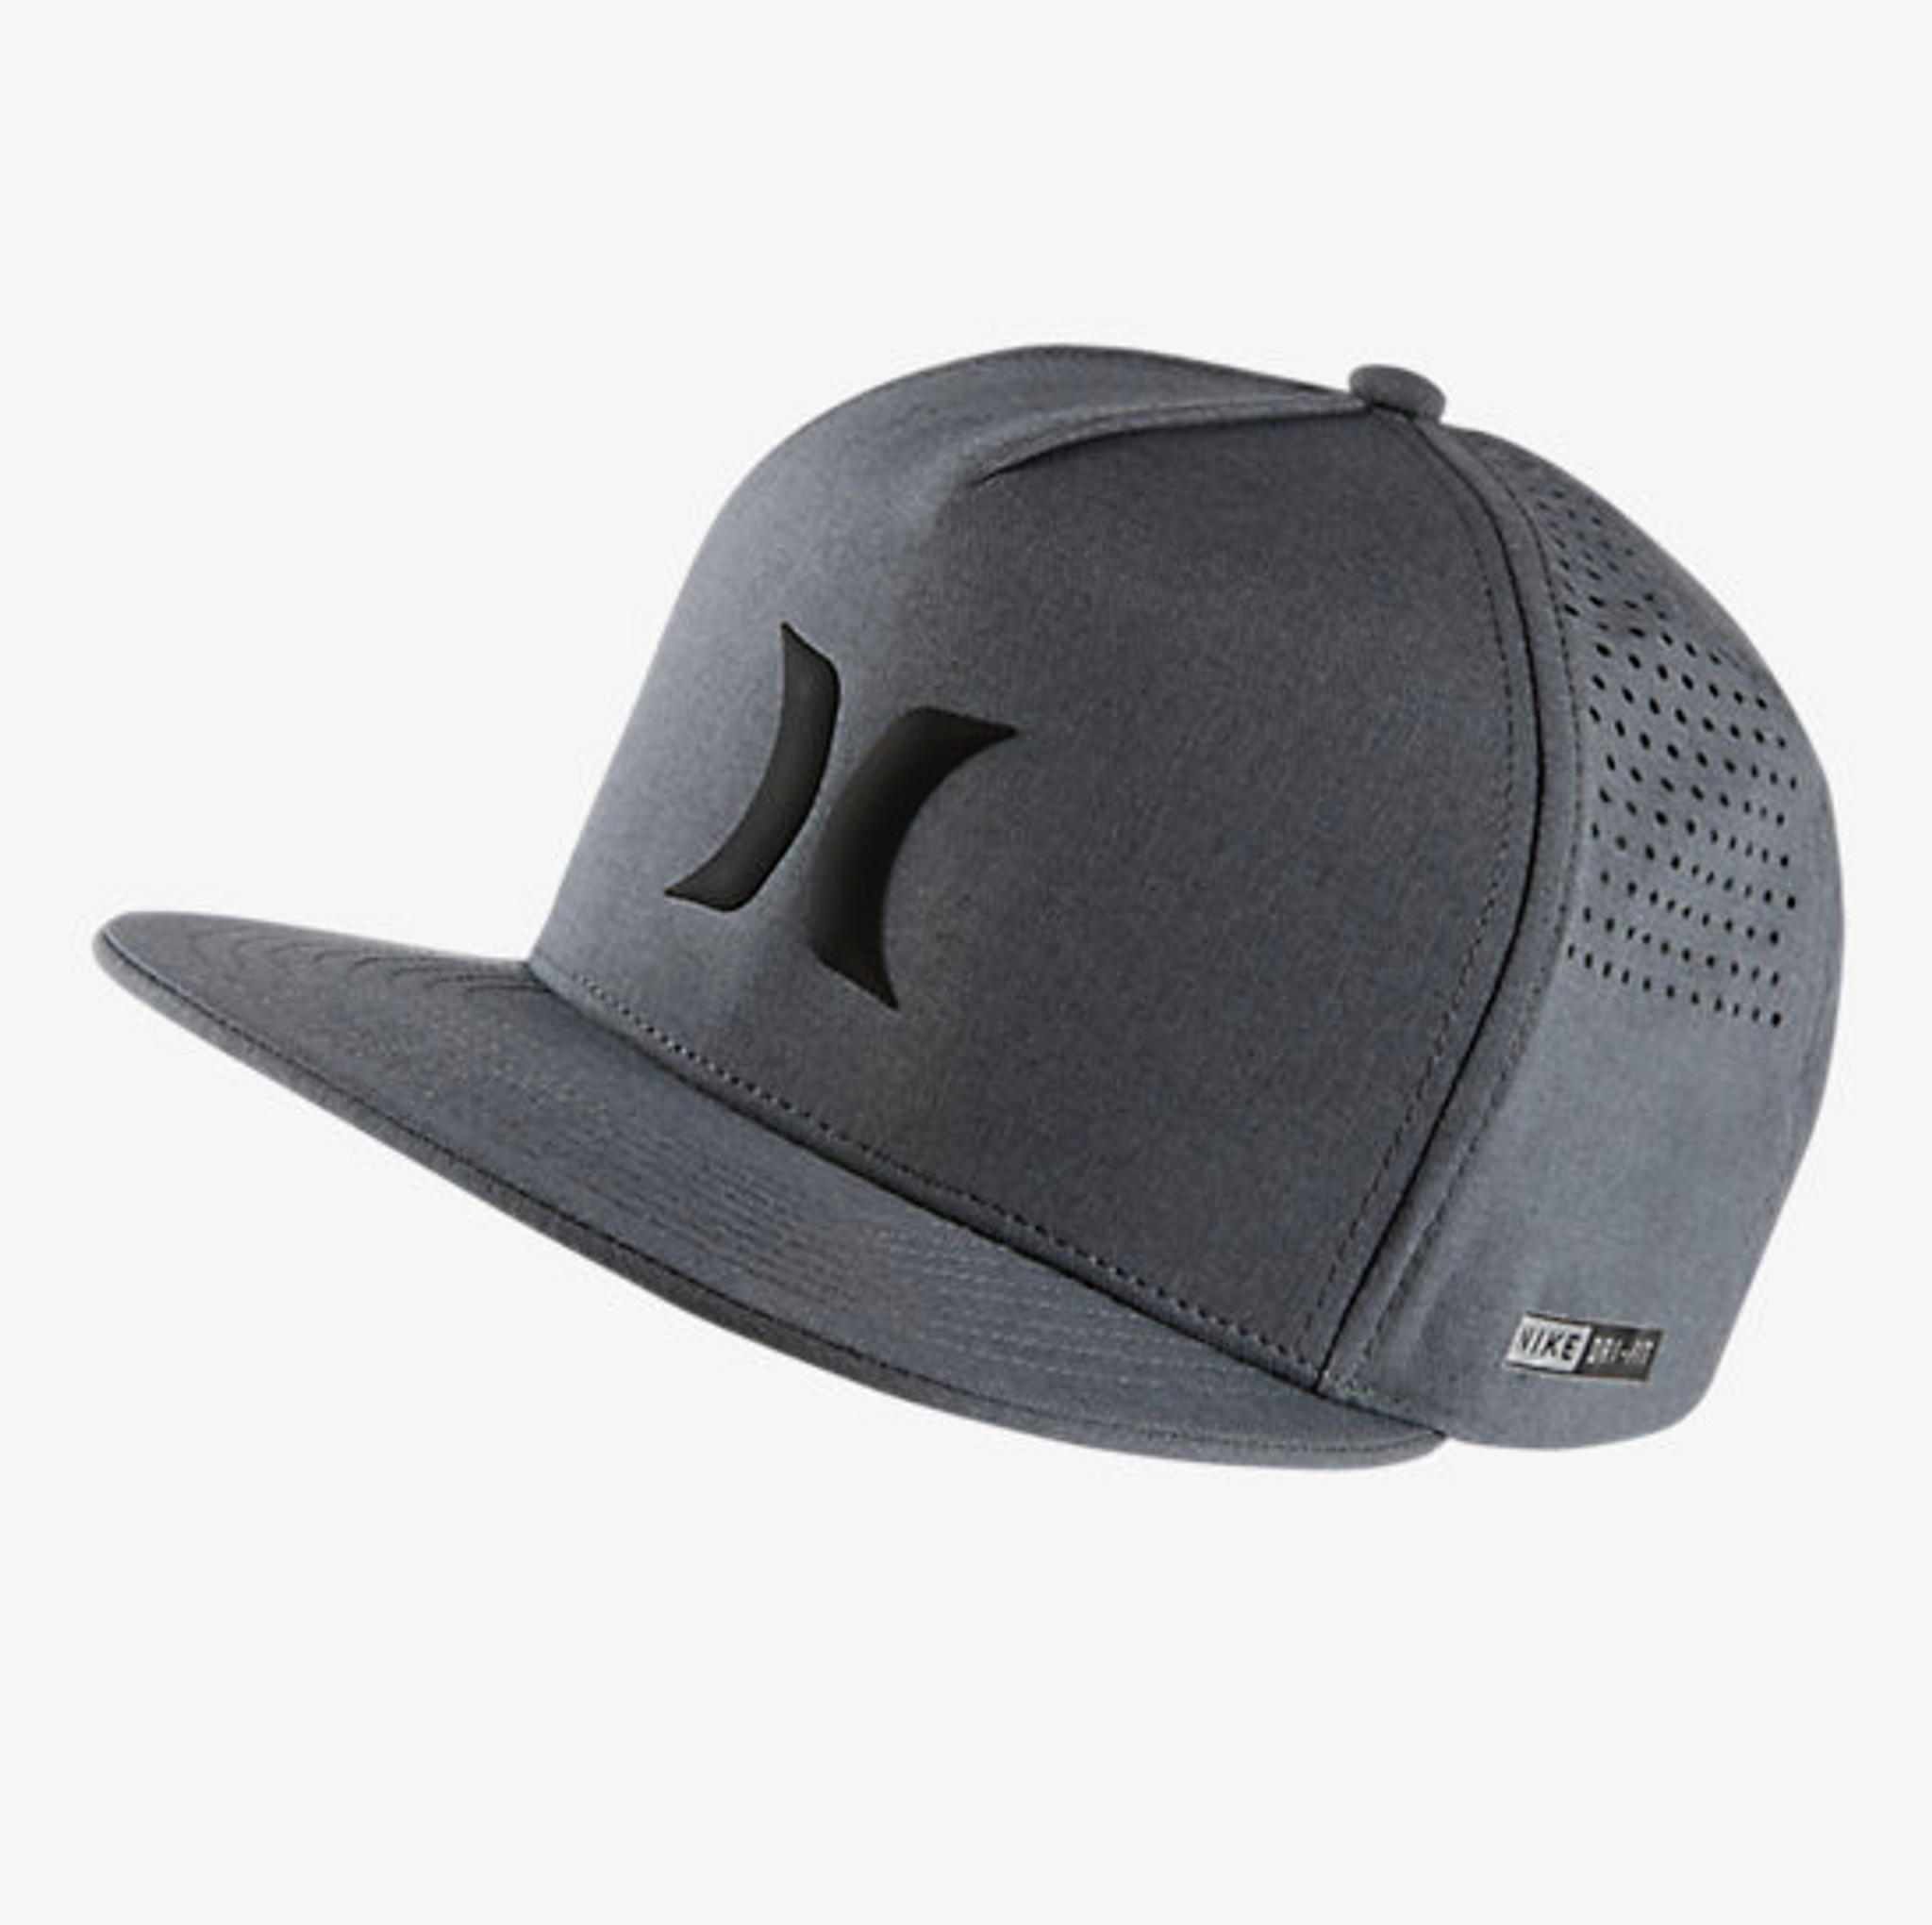 Men's Hurley Cap, Gray Mesh - Chick Elms Grand Entry Western Store and ...